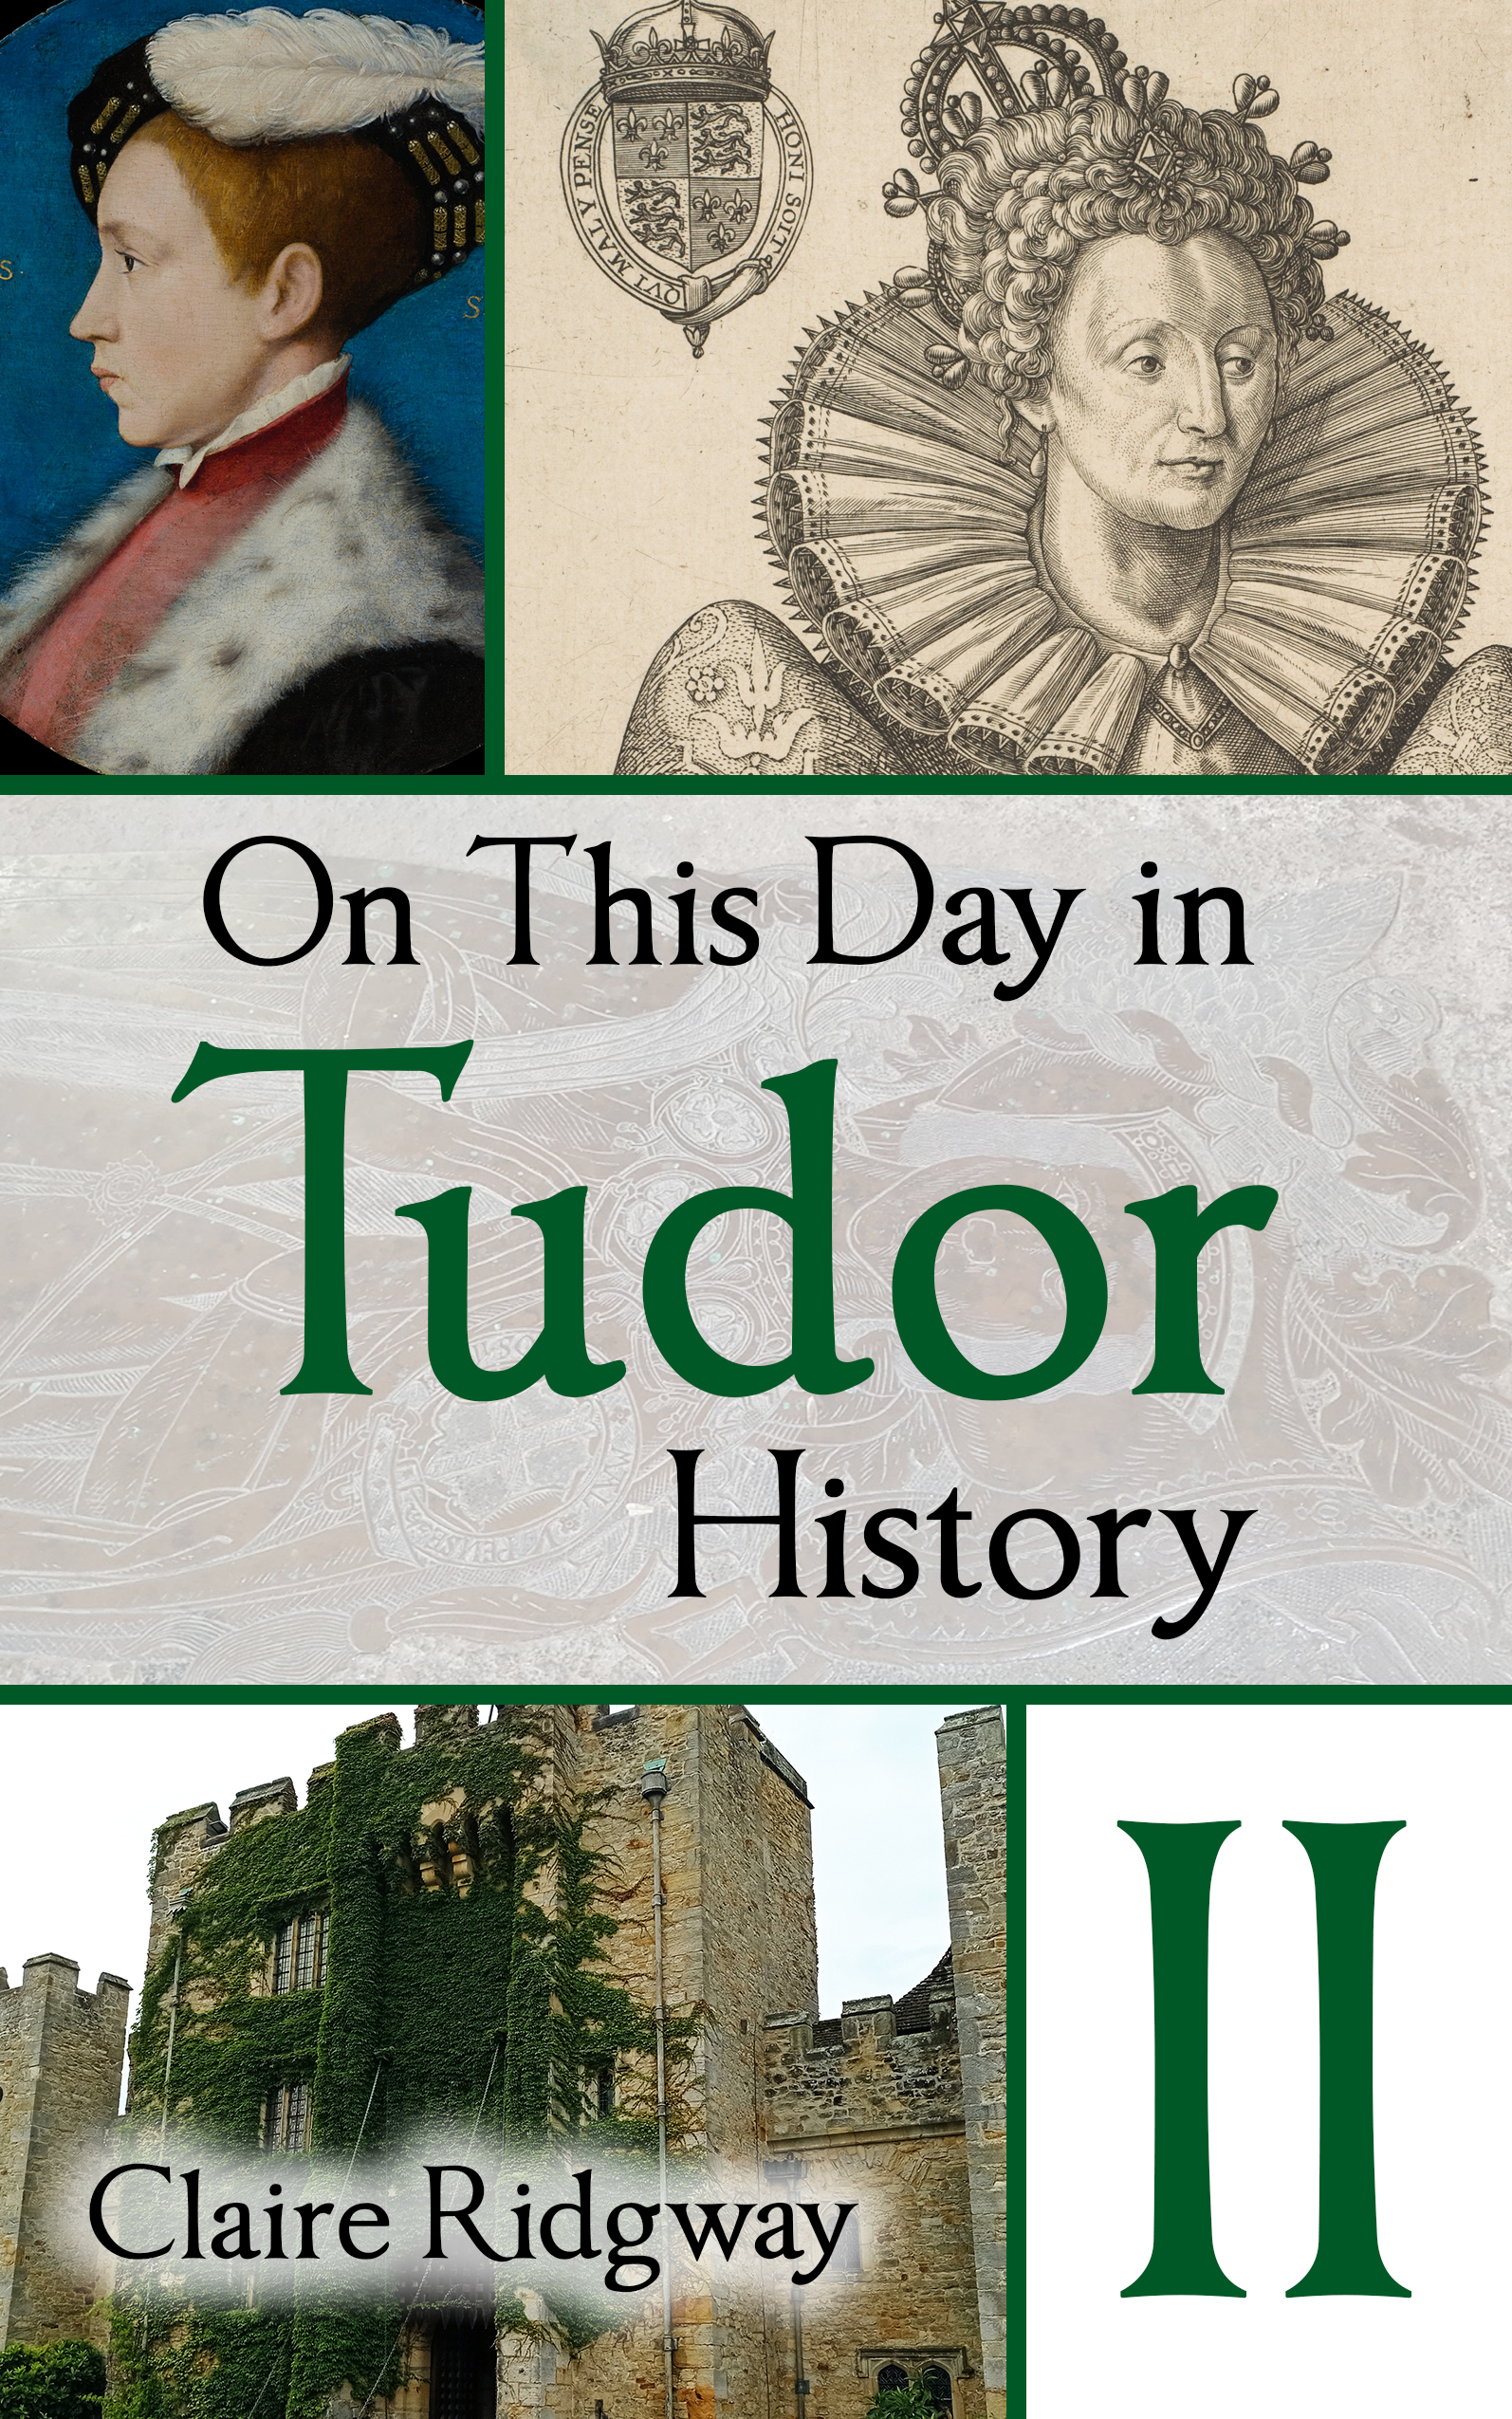 On This Day in Tudor History II